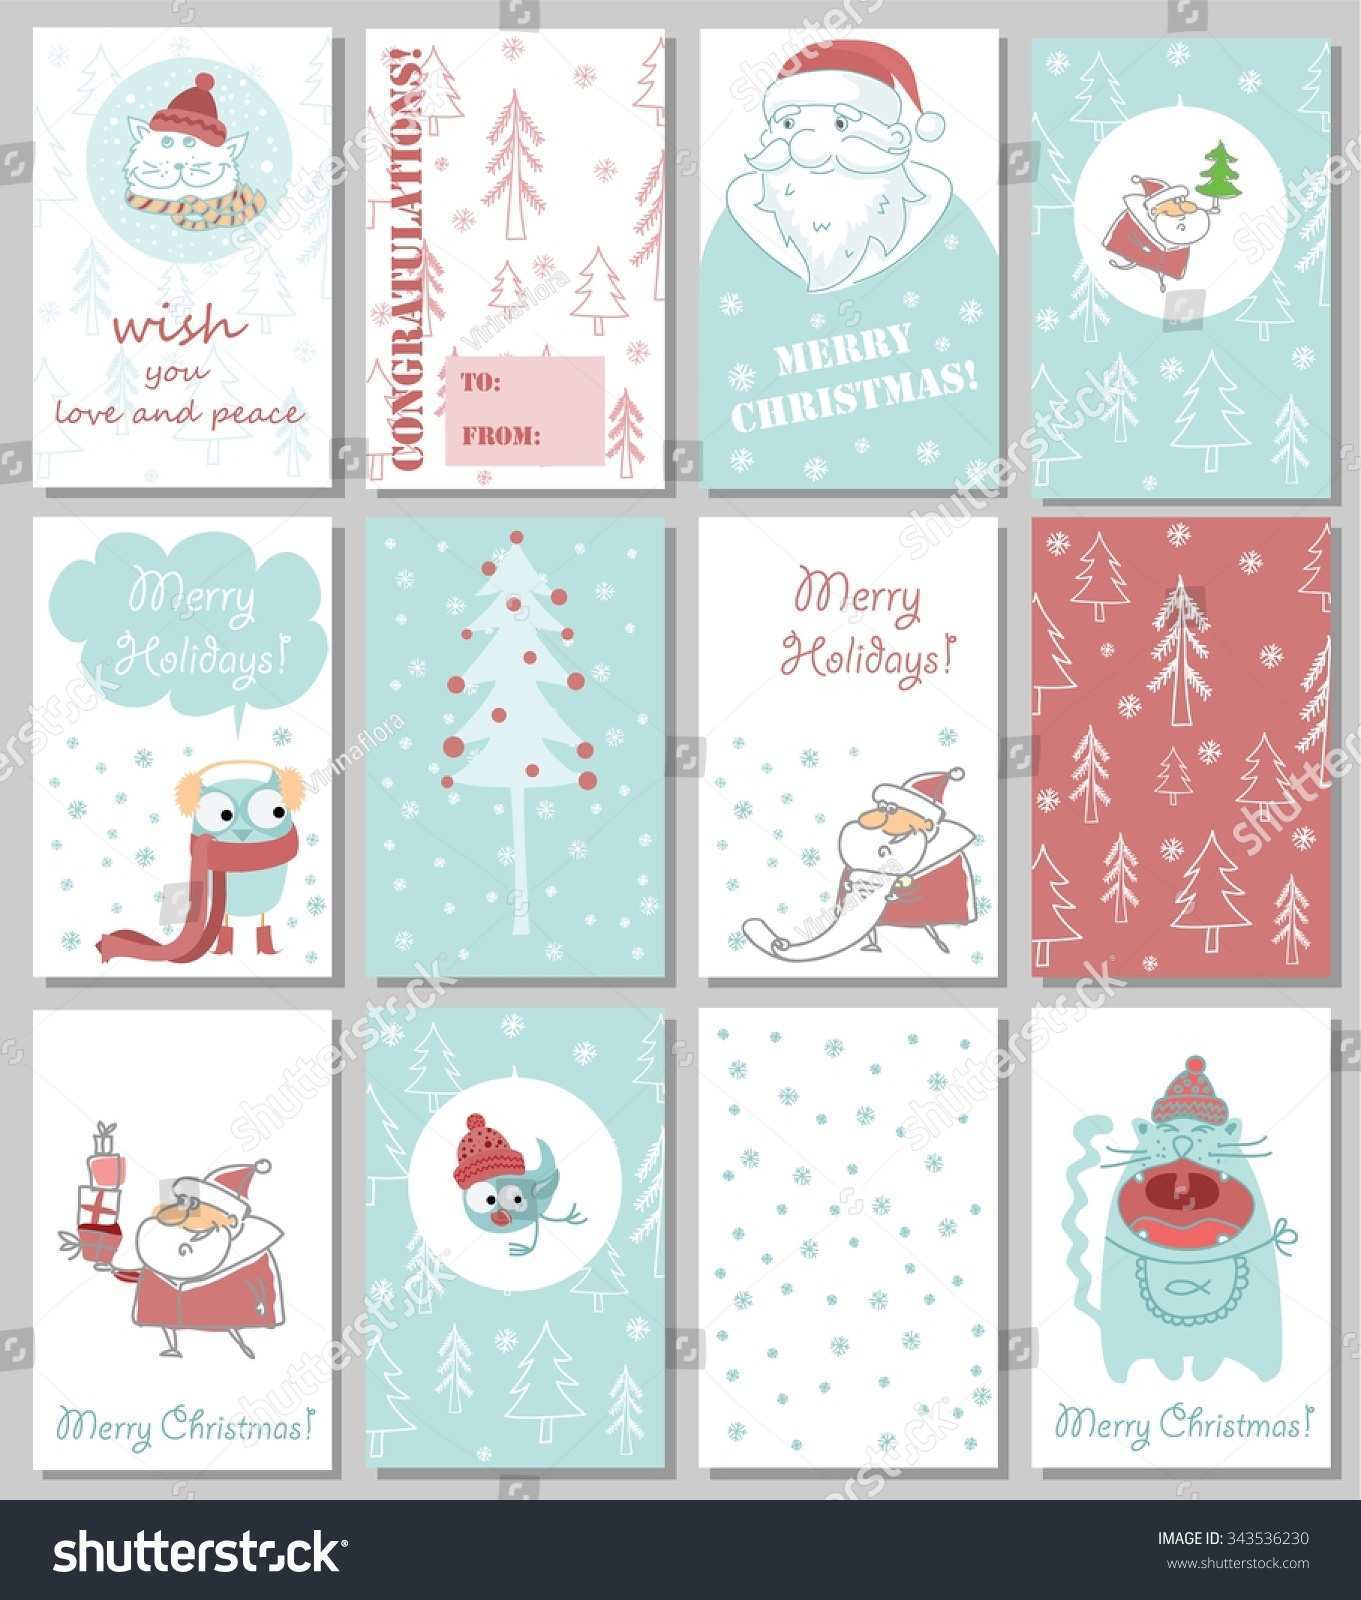 47 Customize Christmas Card Layout Vector For Free by Christmas Card Layout Vector